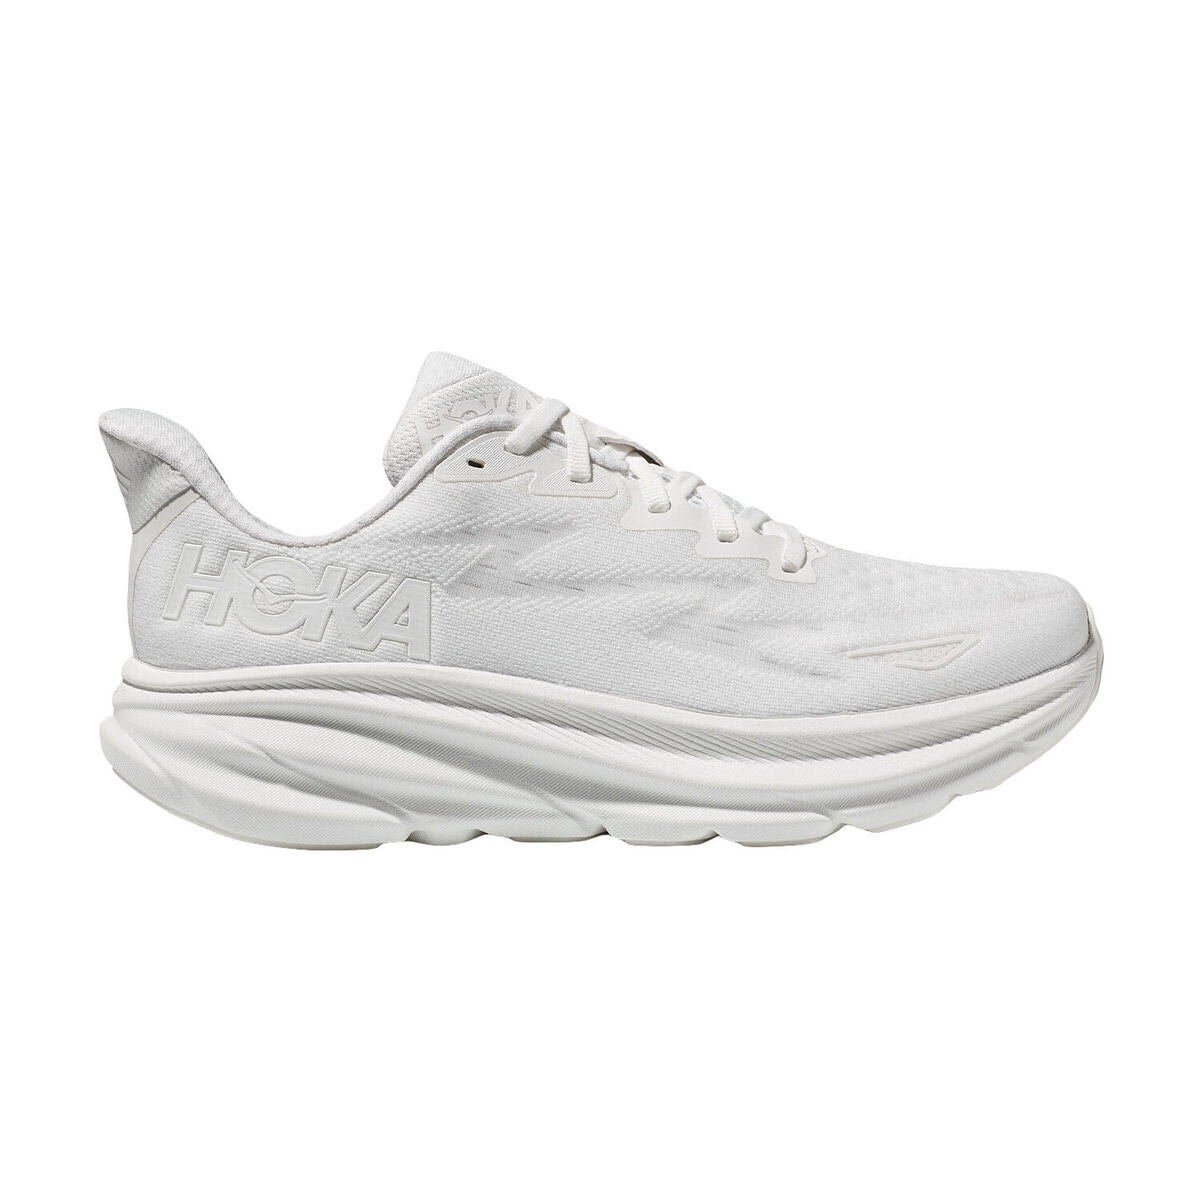 A single white Hoka Clifton 9 White/White - Mens running shoe displayed in profile view on a white background.